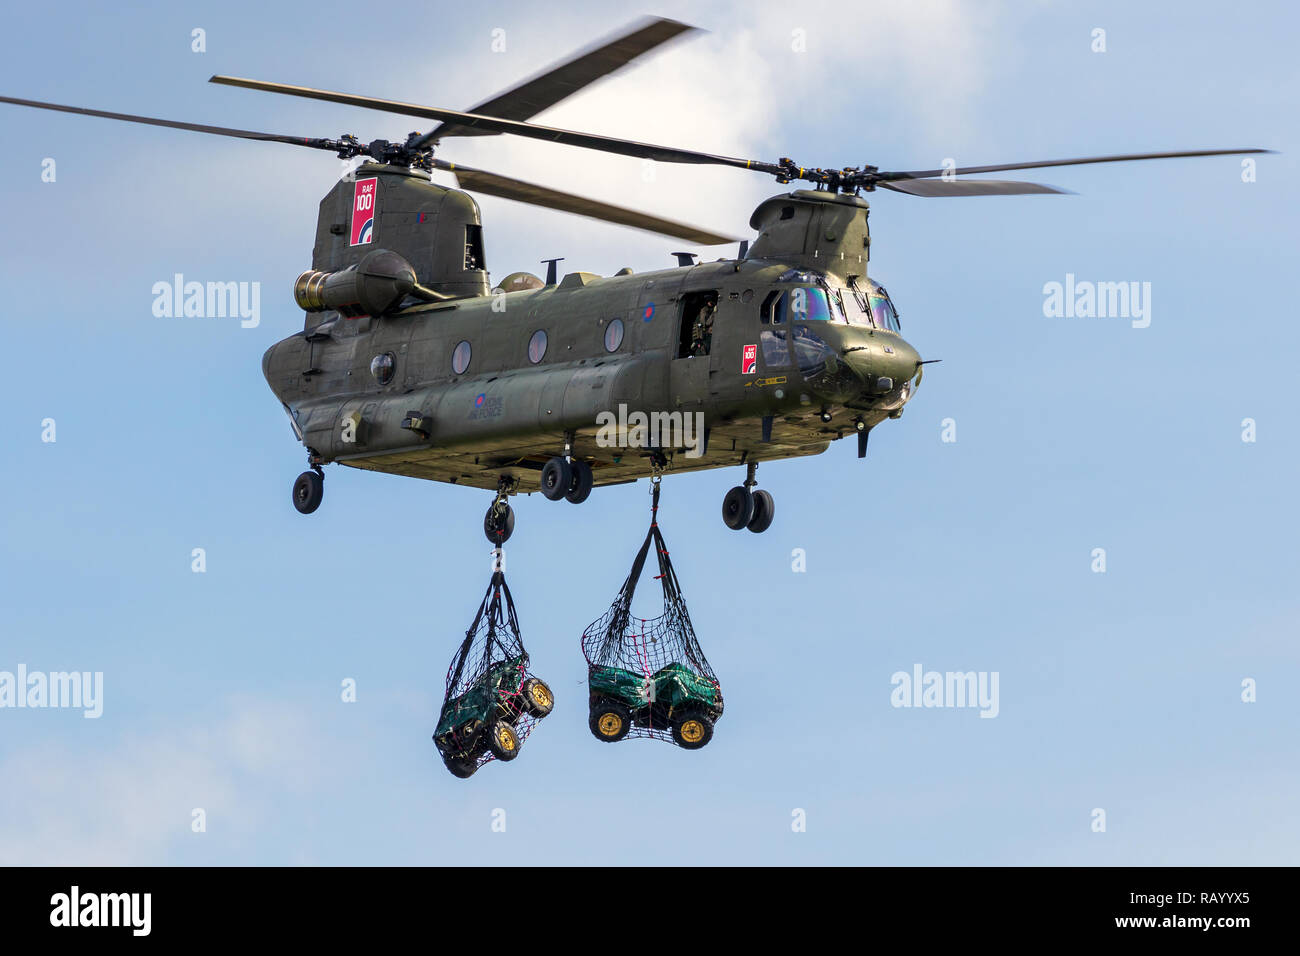 BERLIN - APR 27, 2018: British Royal Air Force Boeing CH-47 Chinook transport helicopter slingload demonstration at the Berlin ILA Air Show. Stock Photo